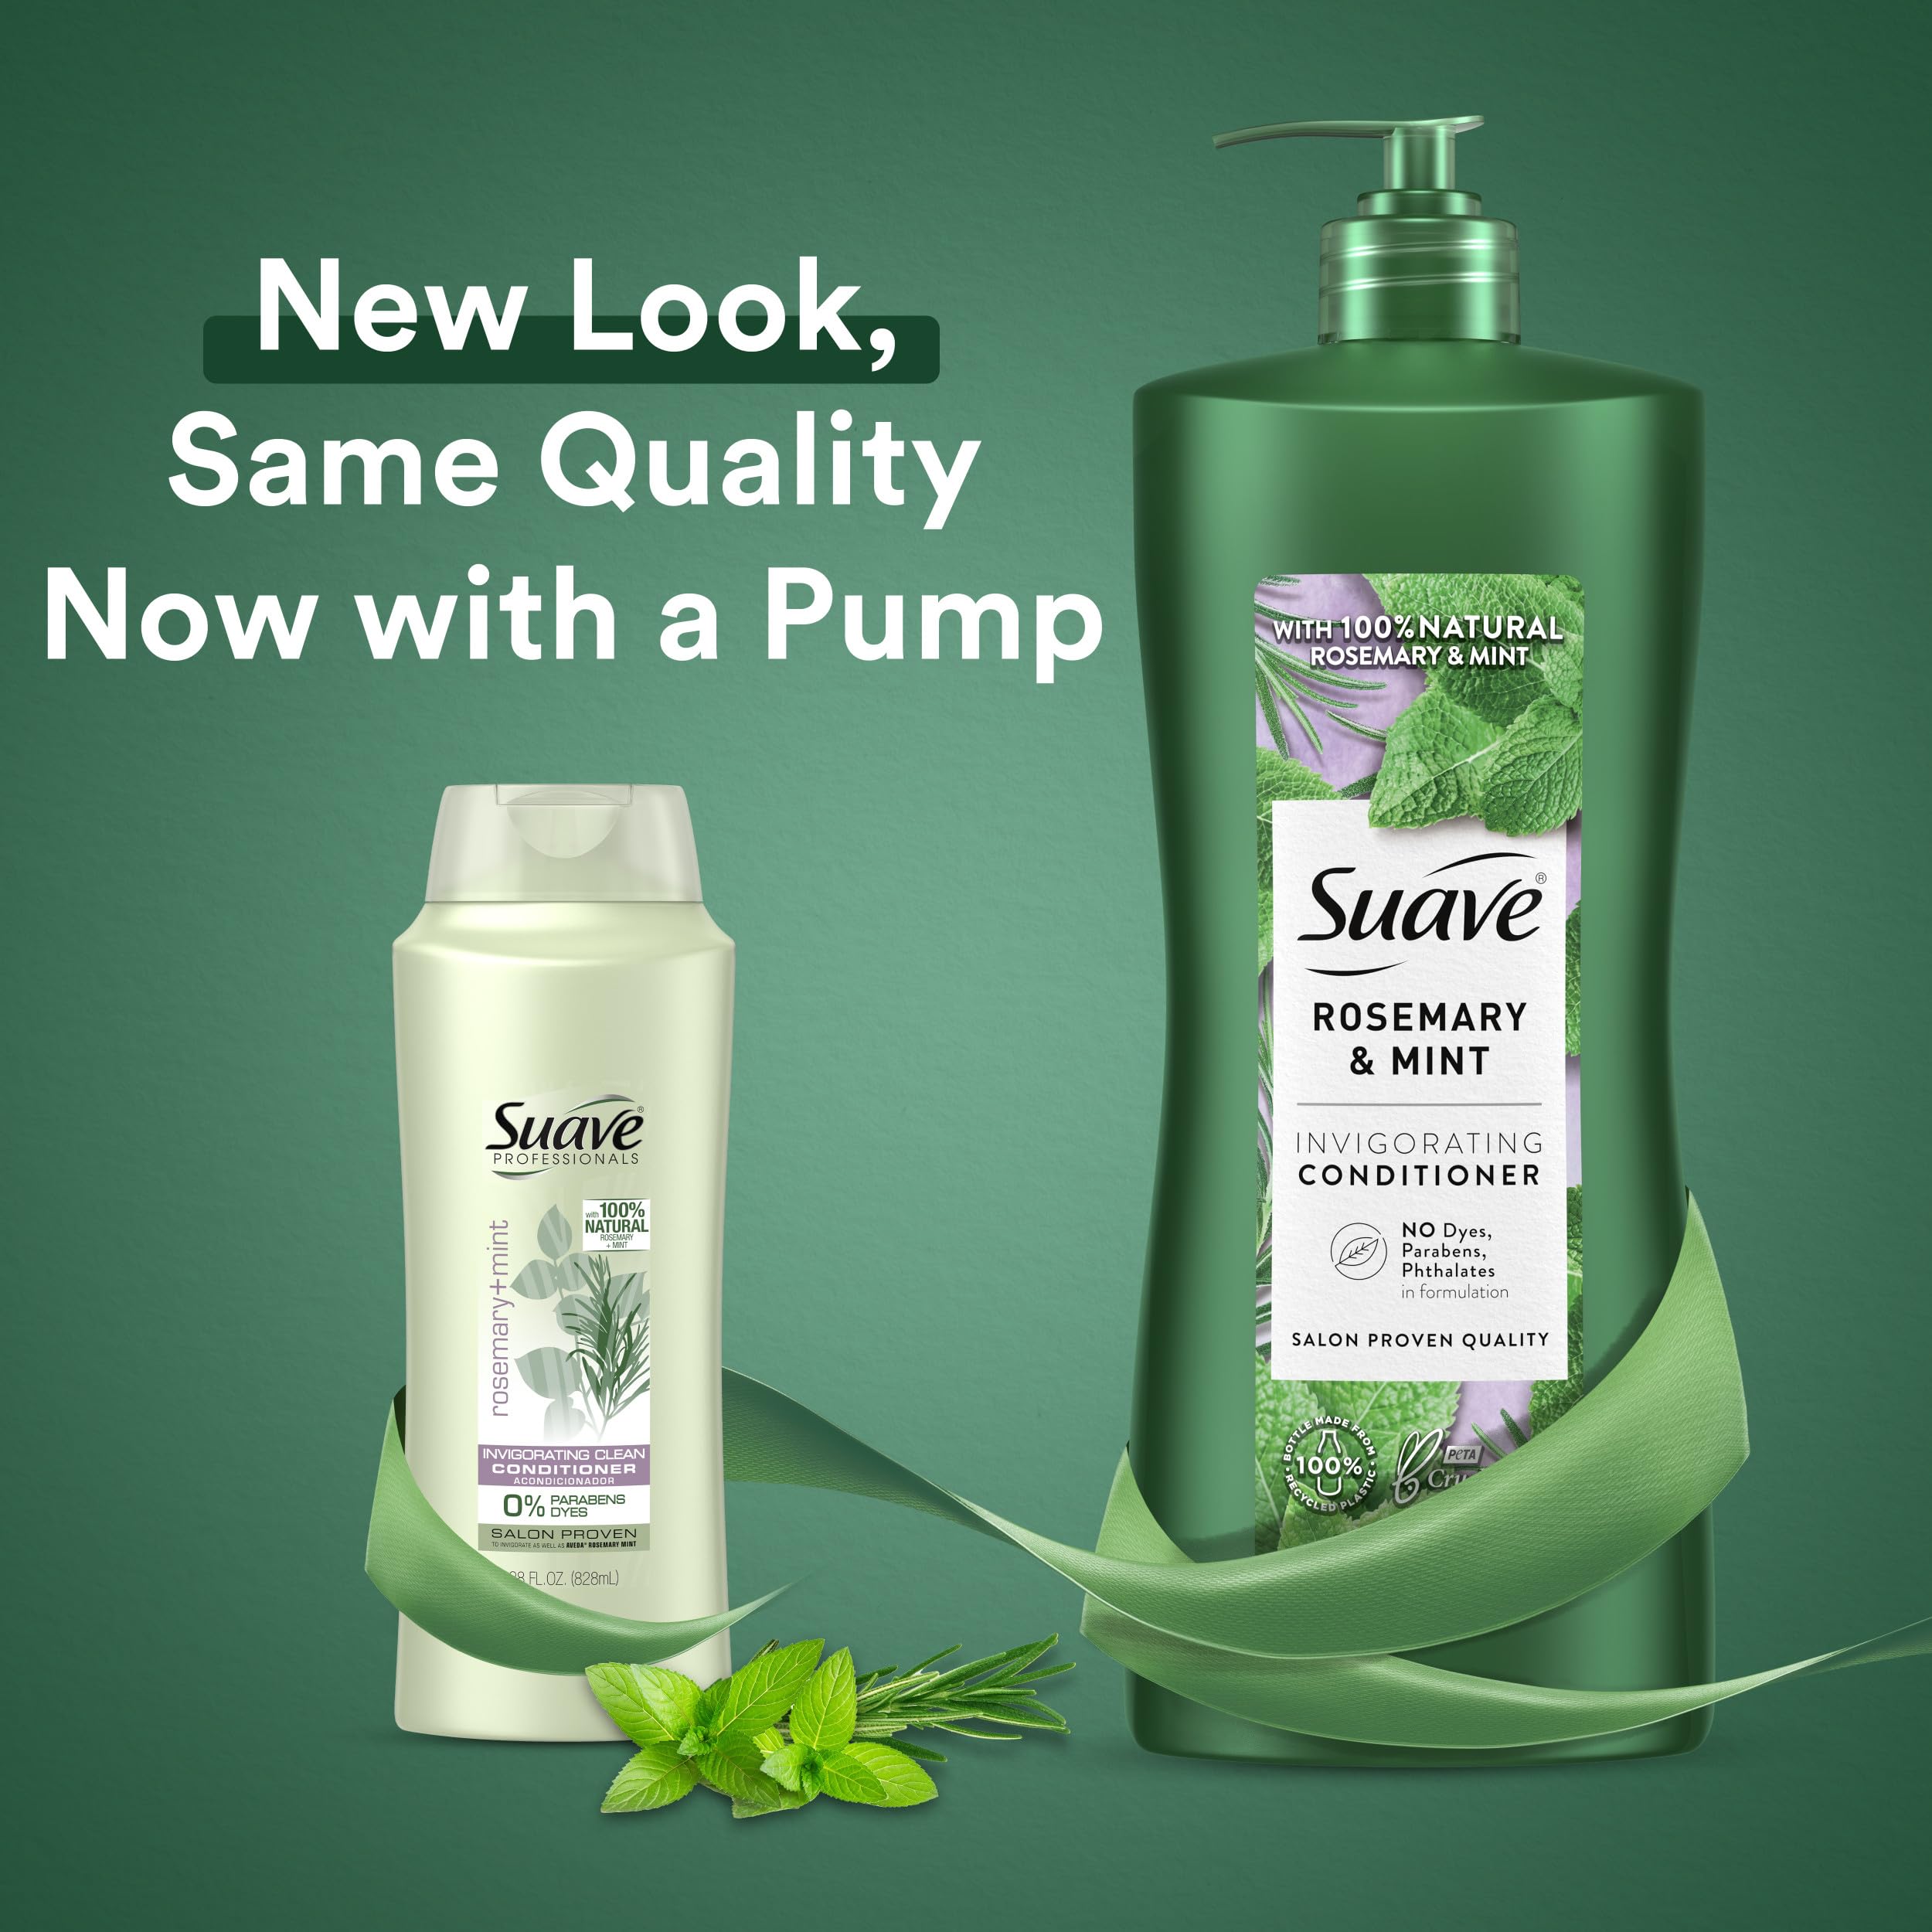 Suave Natural Rosemary & Mint Conditioner, for Strong & Healthy Hair, No Dyes, No Parabens, No Phthalates, 28 oz Pack of 4